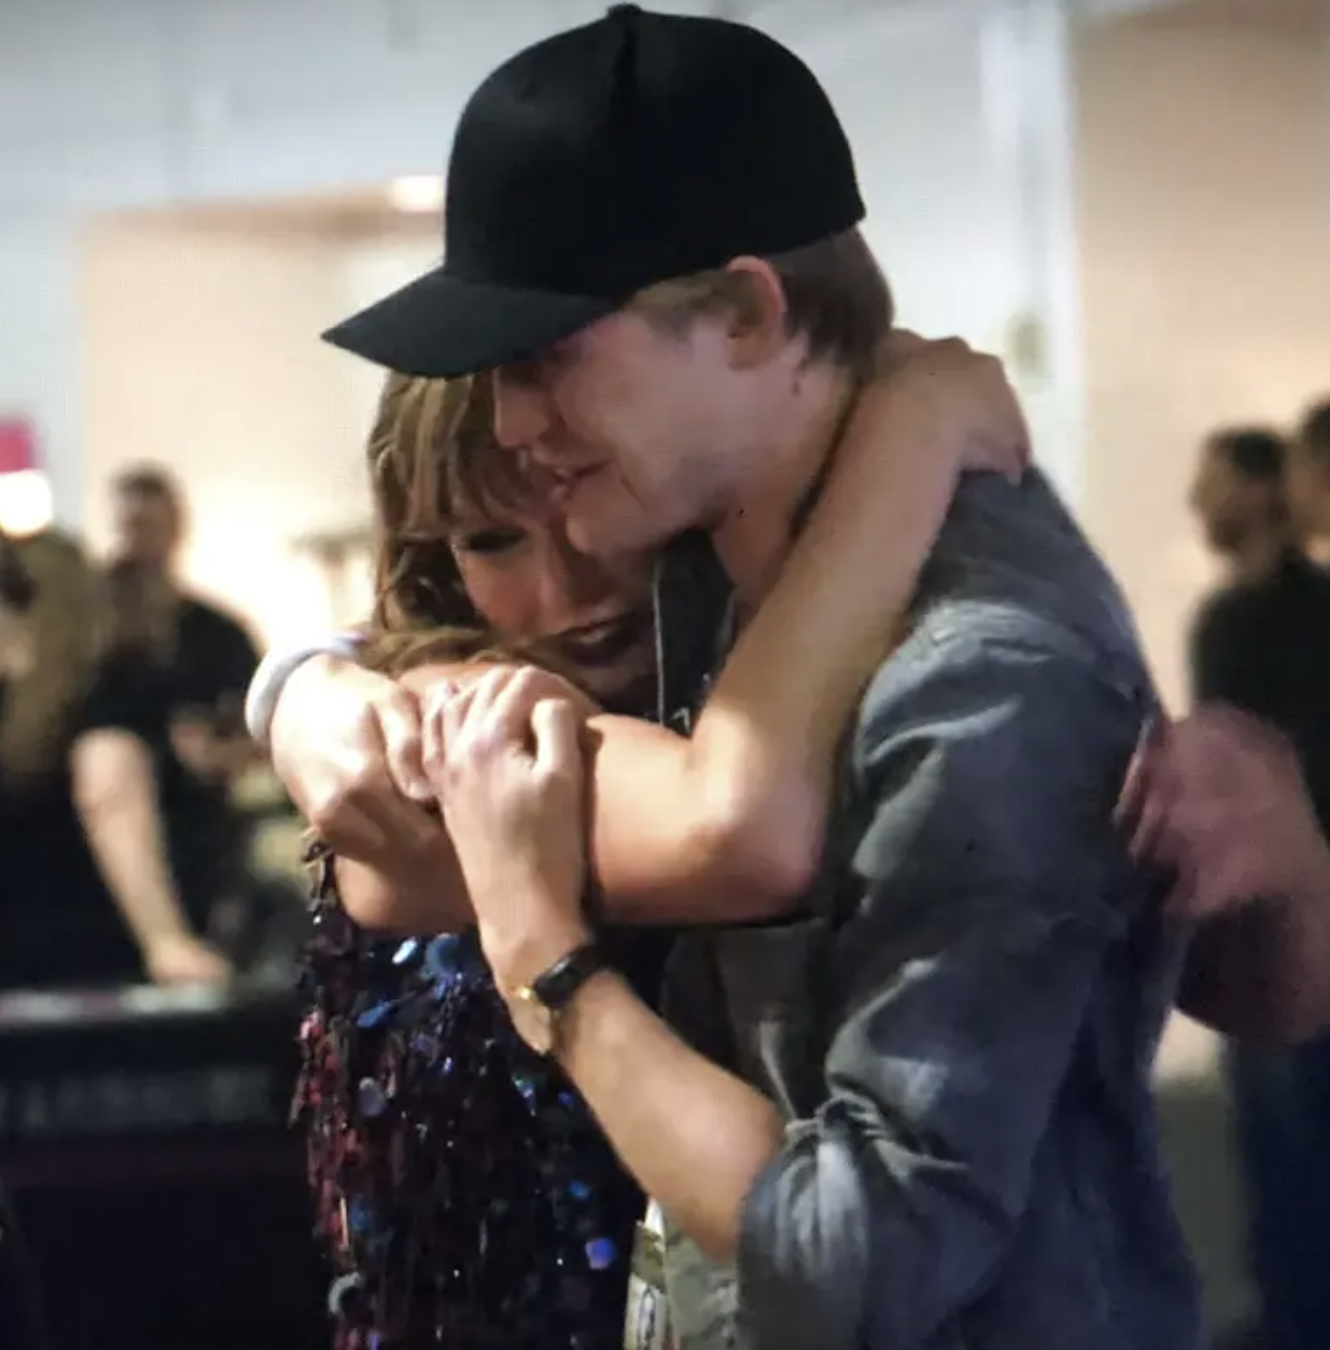 Taylor Swift and Joe Alwyn, embracing each other. Taylor is wearing a sparkly outfit, while Joe is in a casual shirt and cap